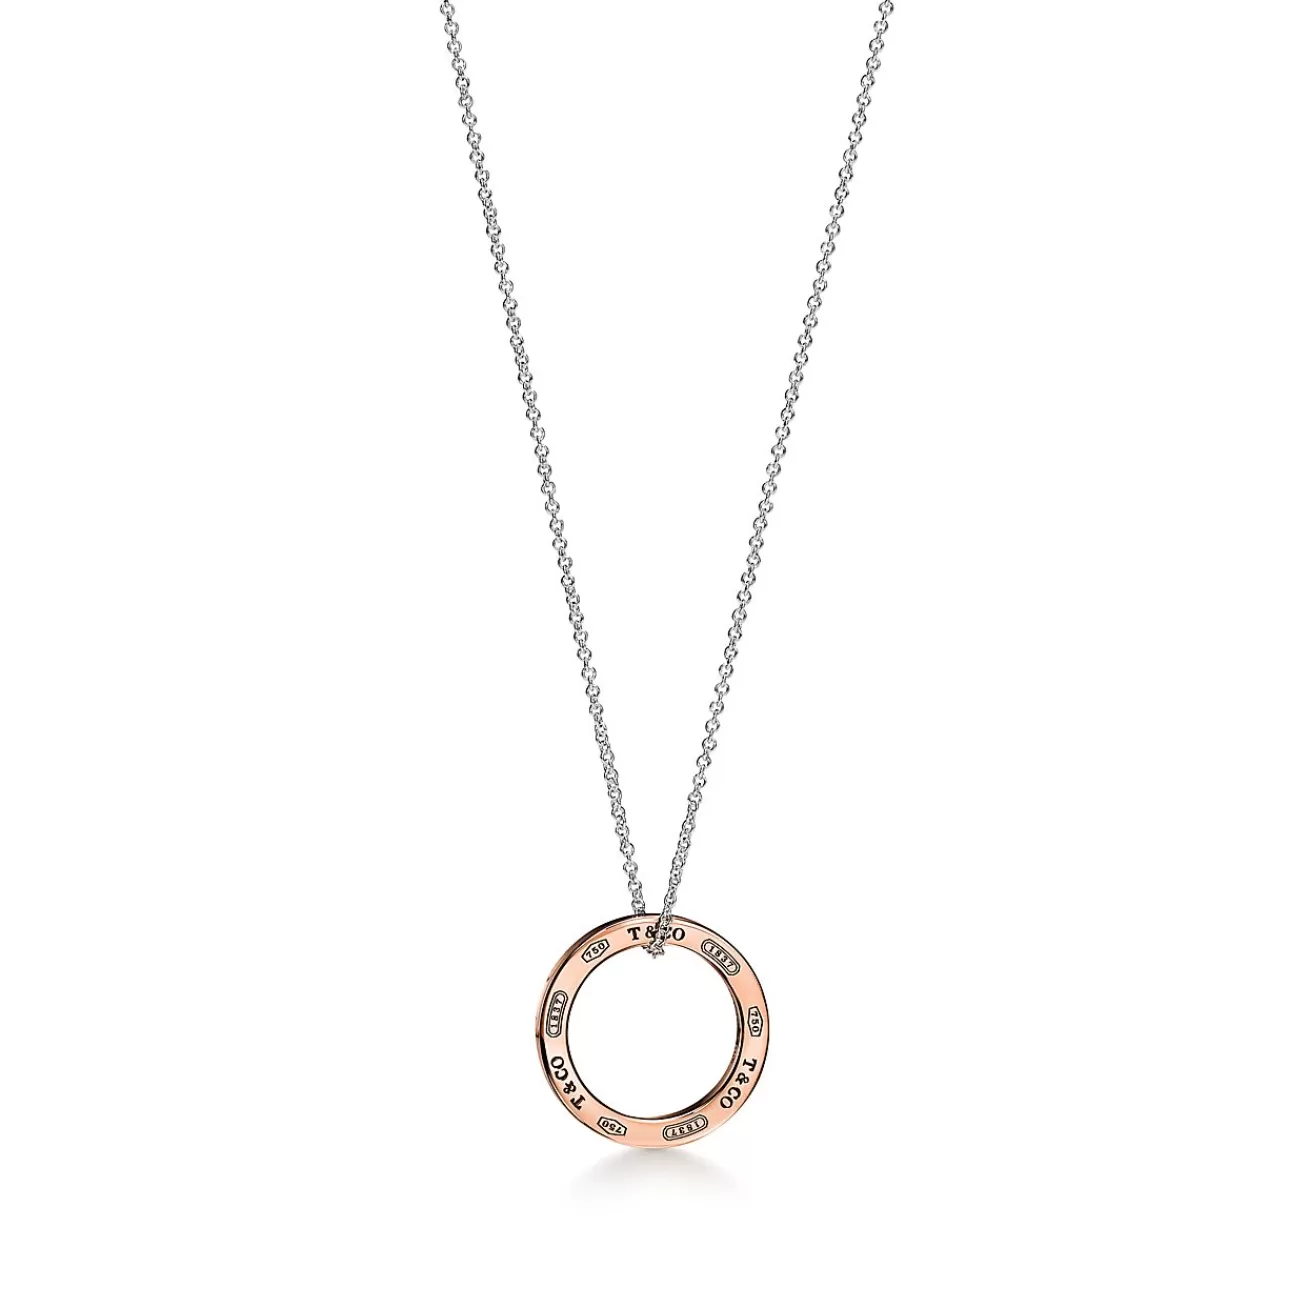 Tiffany & Co. Tiffany 1837® Circle Pendant in Sterling Silver and Rose Gold | ^ Necklaces & Pendants | New Jewelry